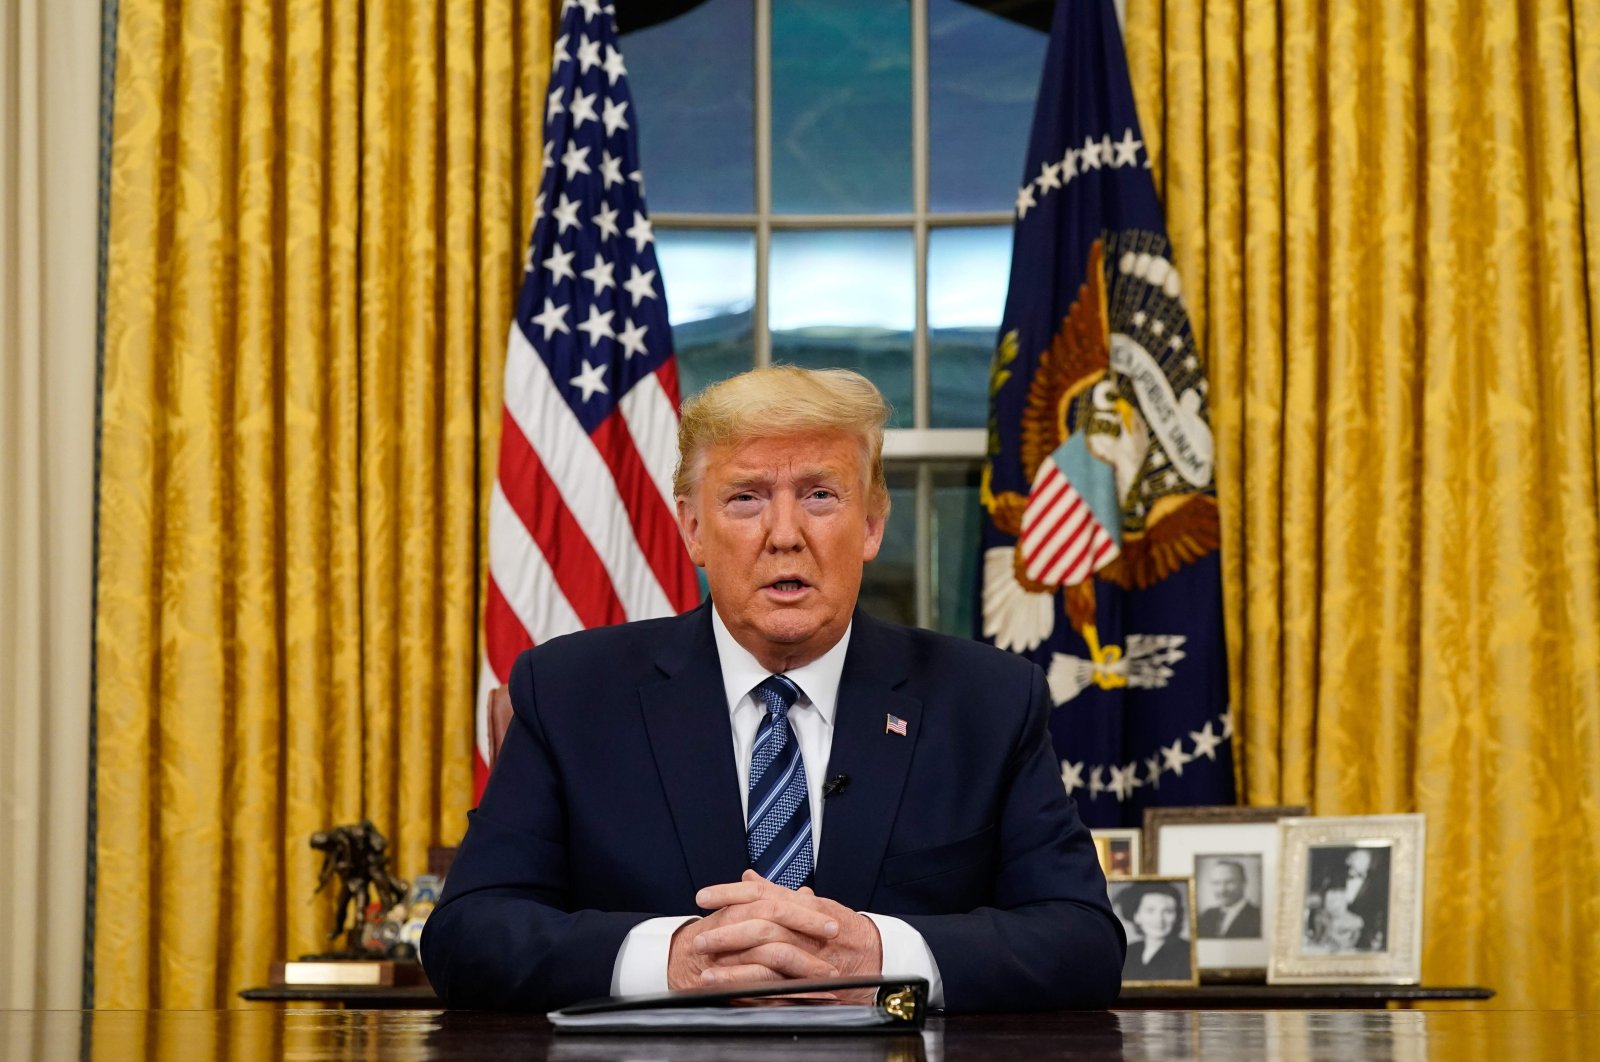 U.S. President Donald Trump addresses the nation from the Oval Office, Washington, D.C., March 11, 2020. (AFP Photo)